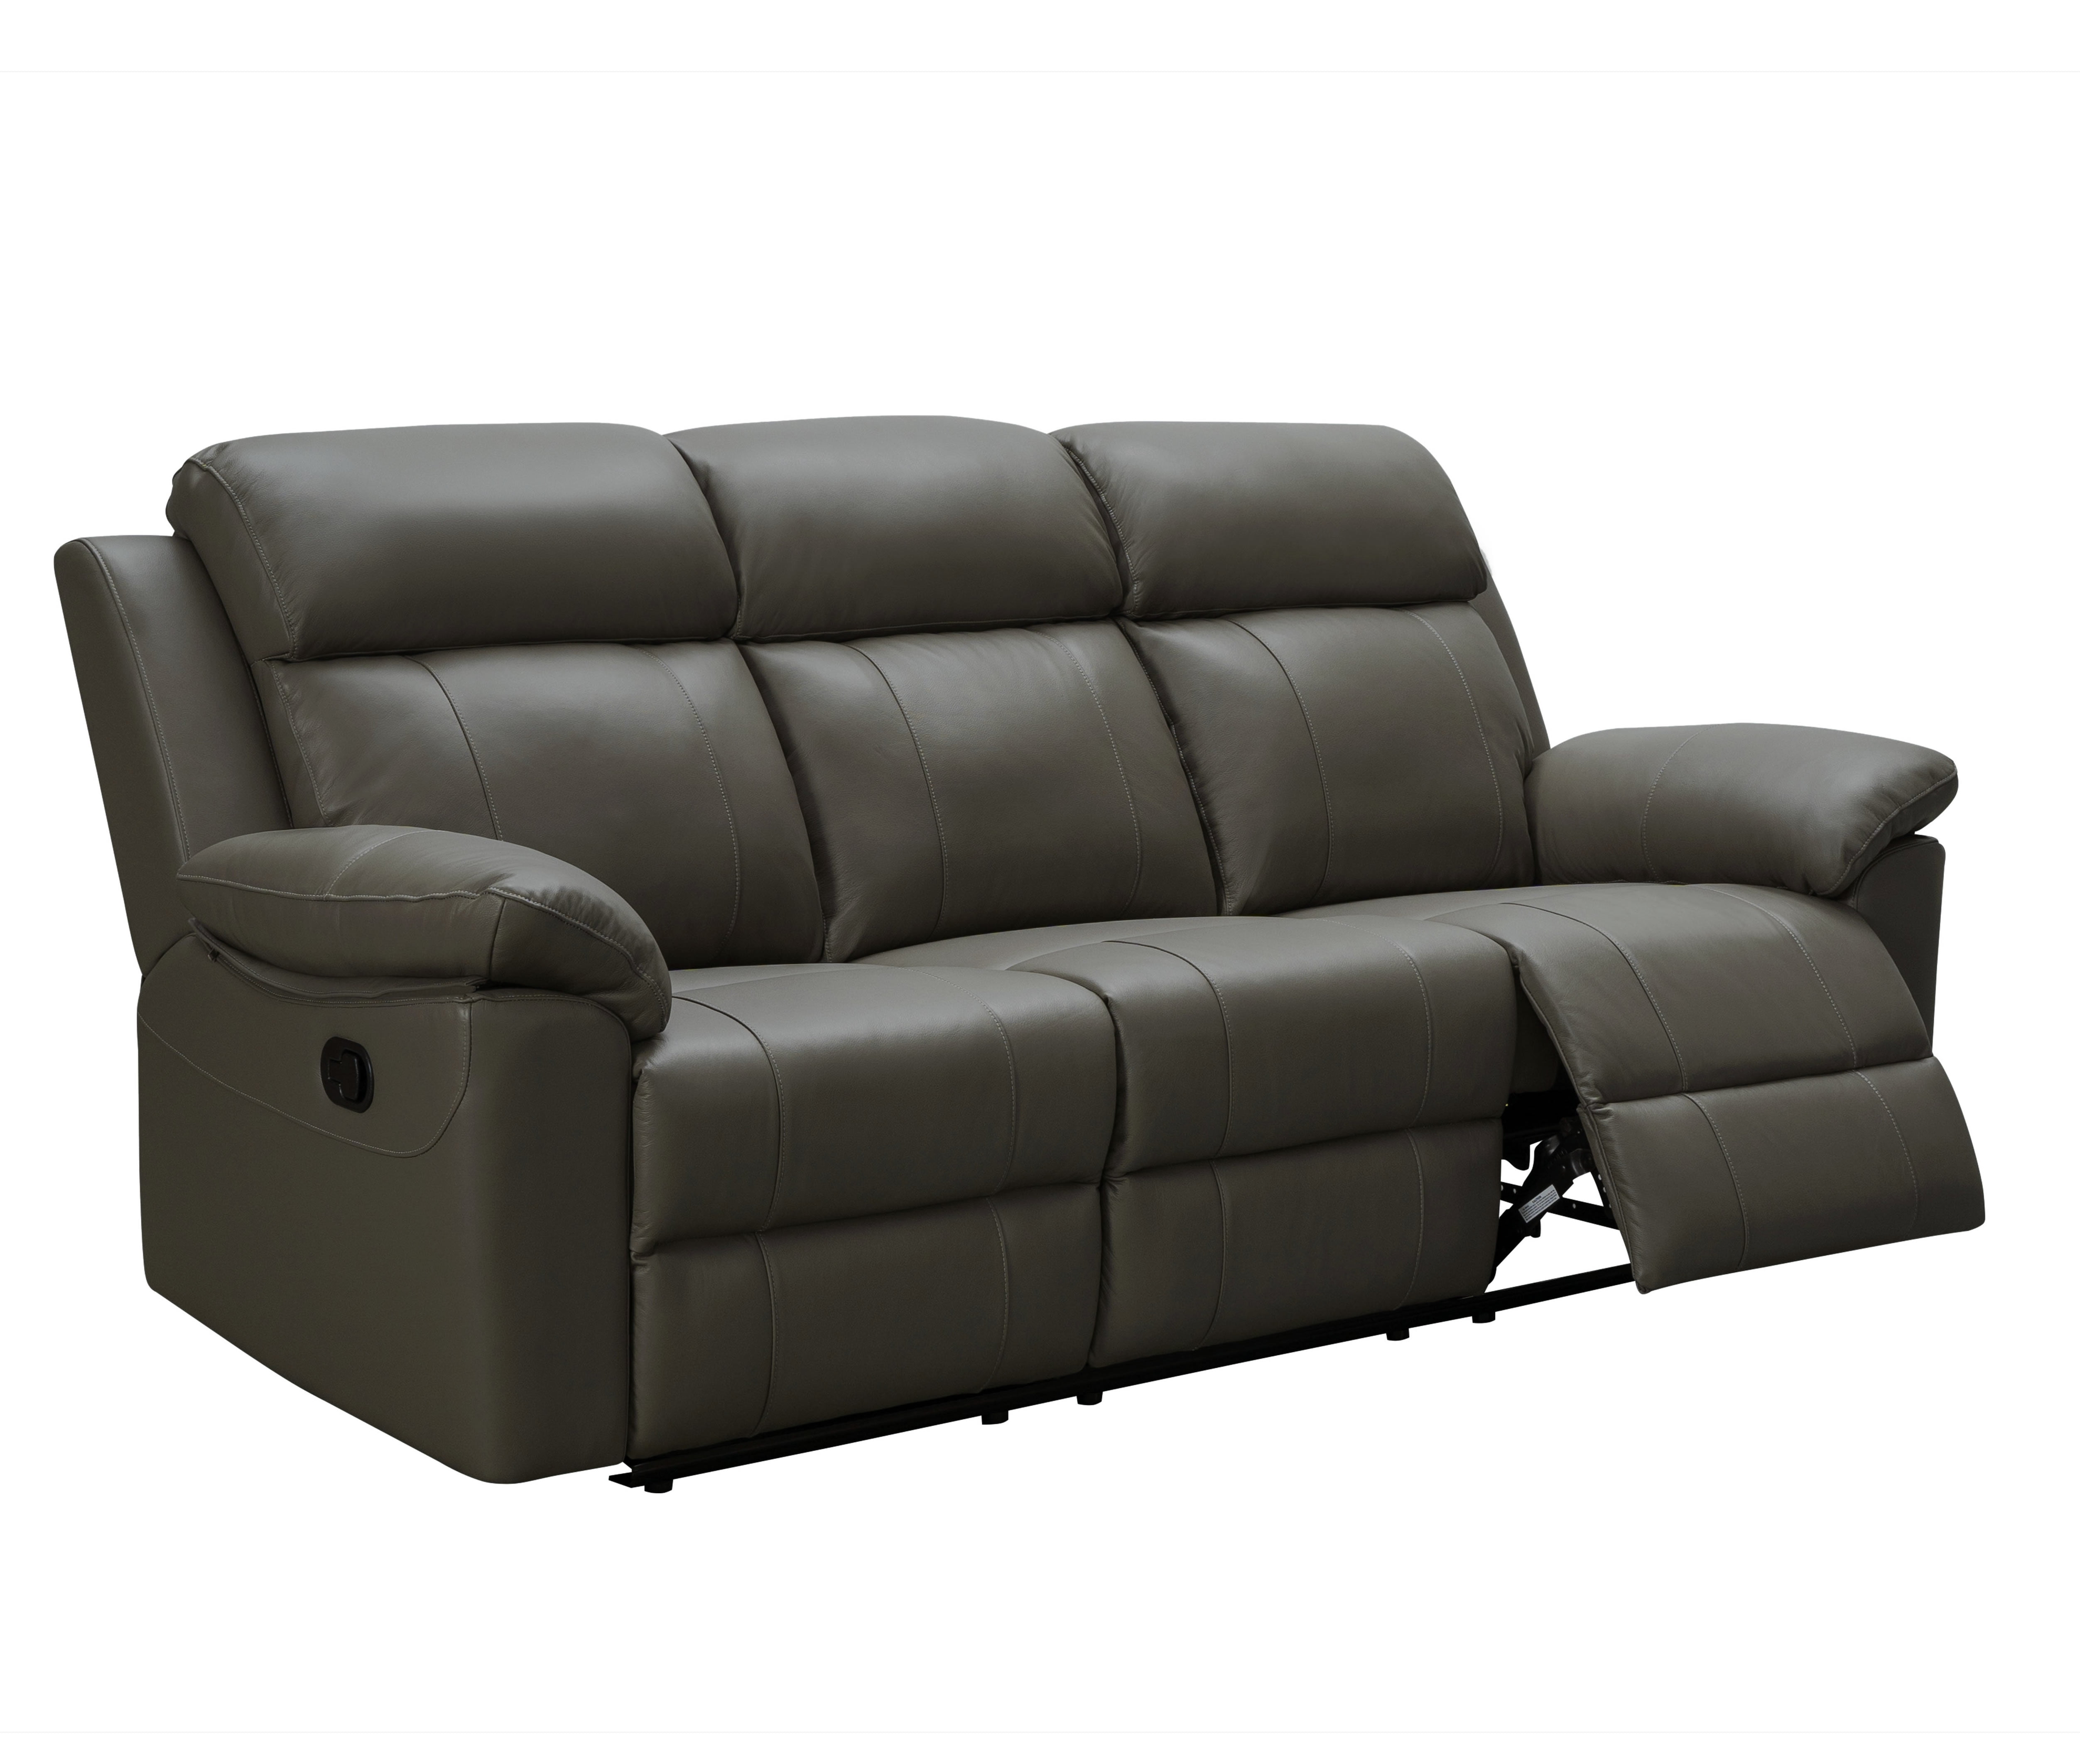 Dark Brown Abbyson Living Top Grain Leather Upholstered Reclining Sofa and Loveseat Set